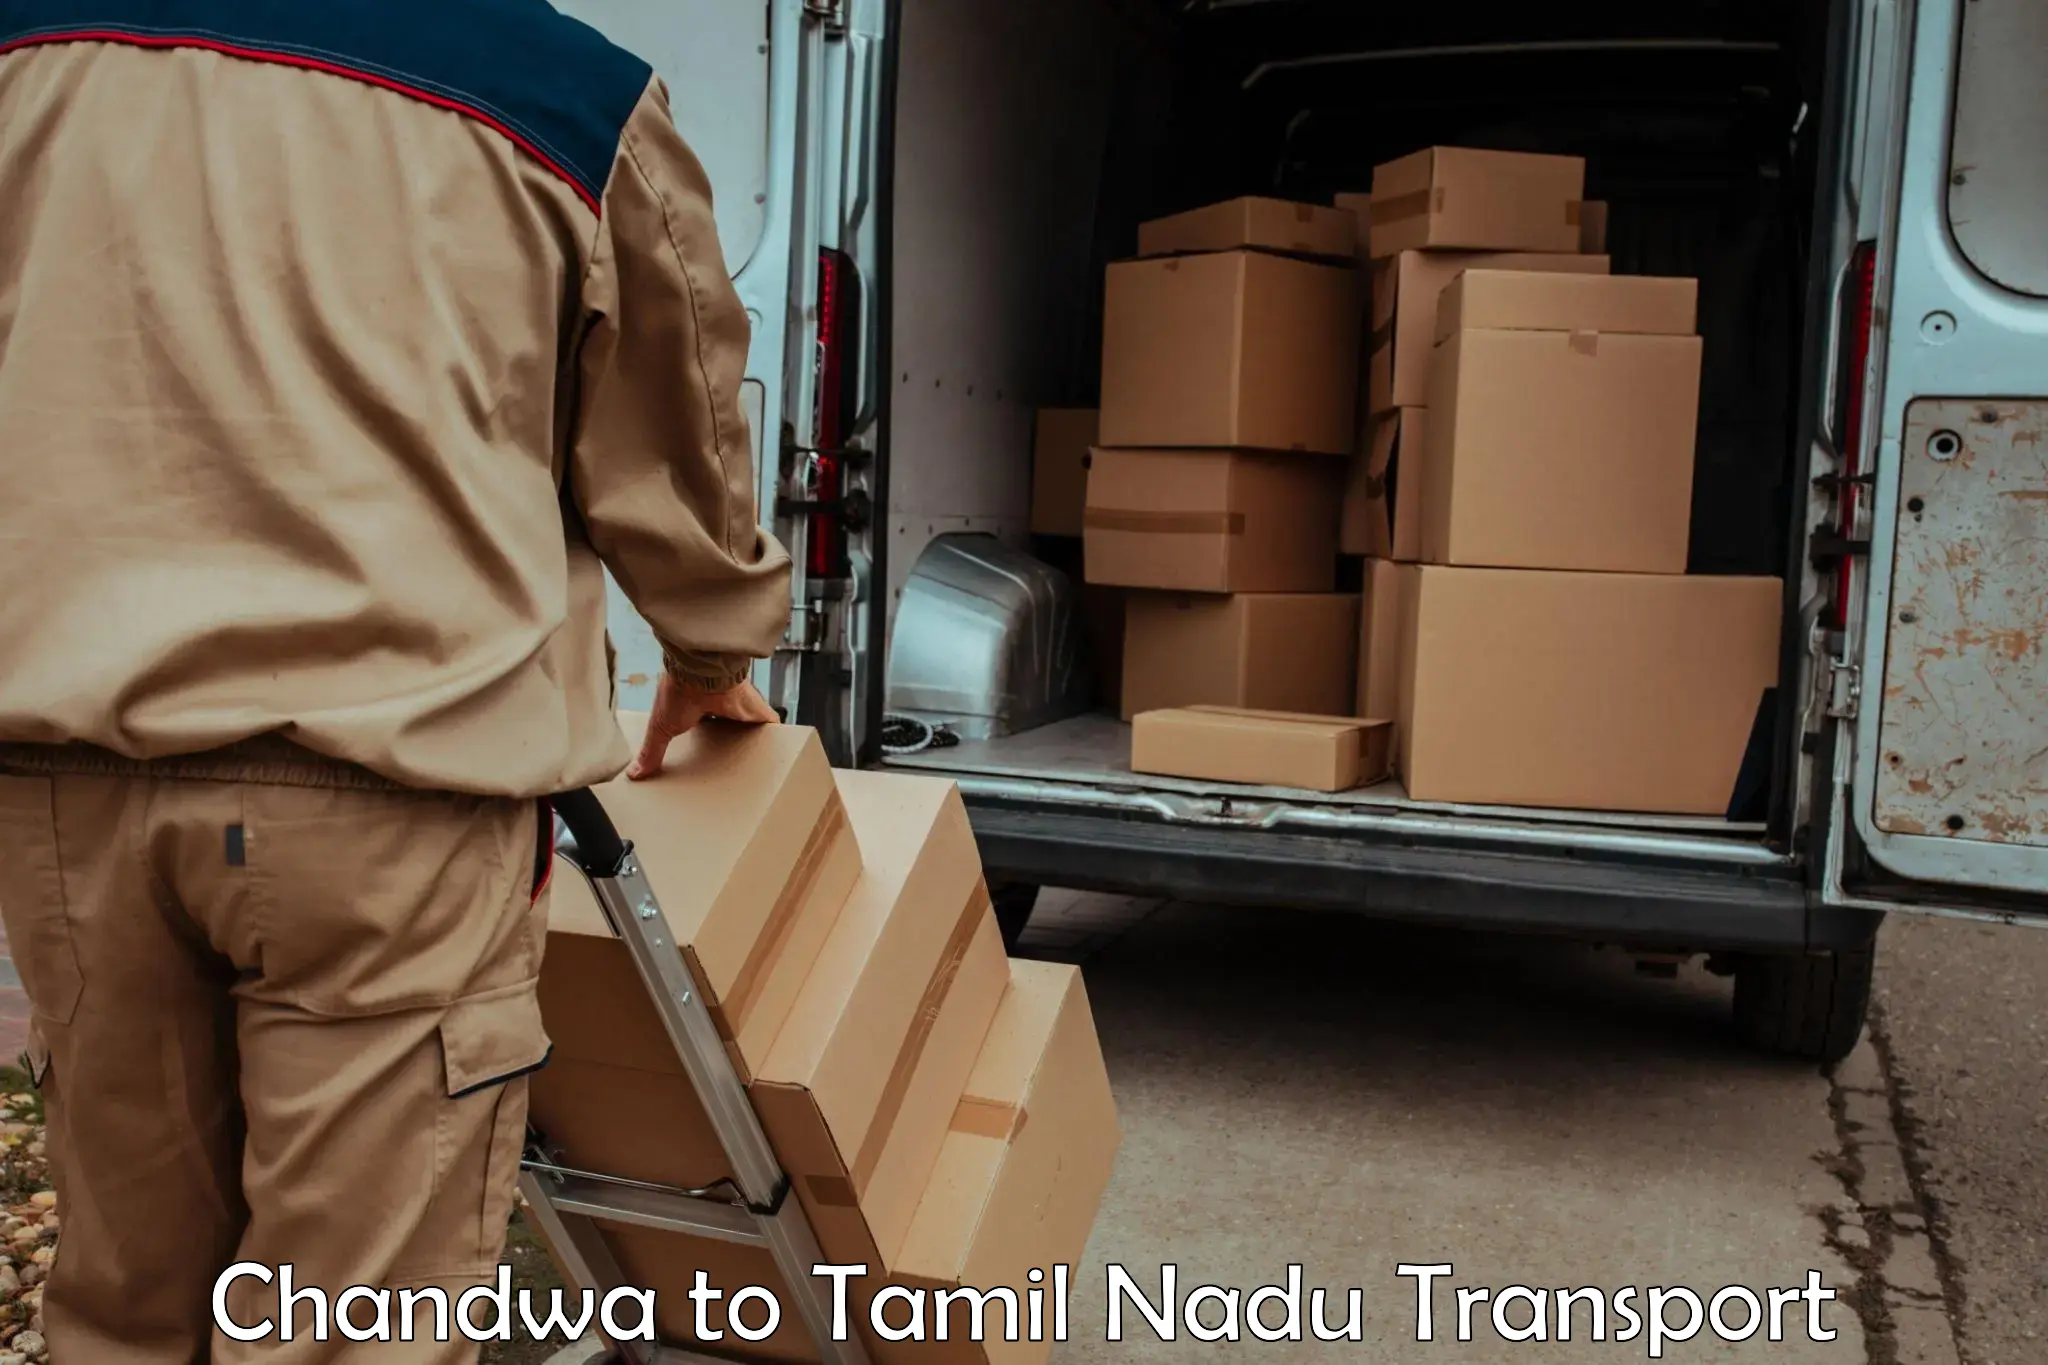 Air freight transport services Chandwa to Vellore Institute of Technology